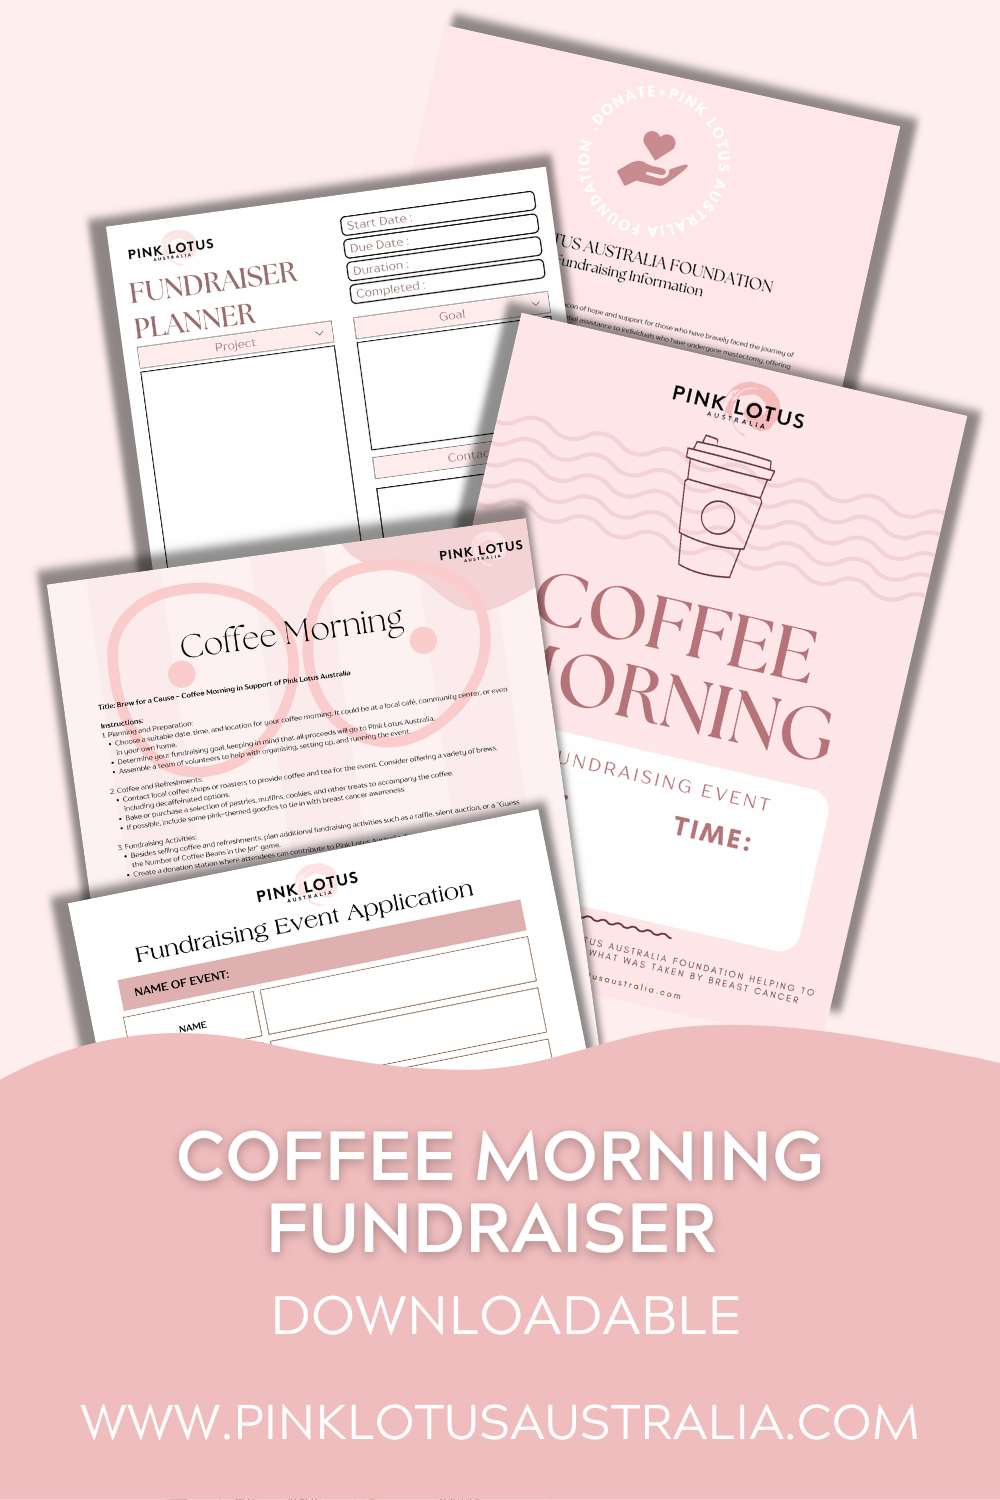 Downloadable- ‘Coffee Morning Fundraiser’’ FREE